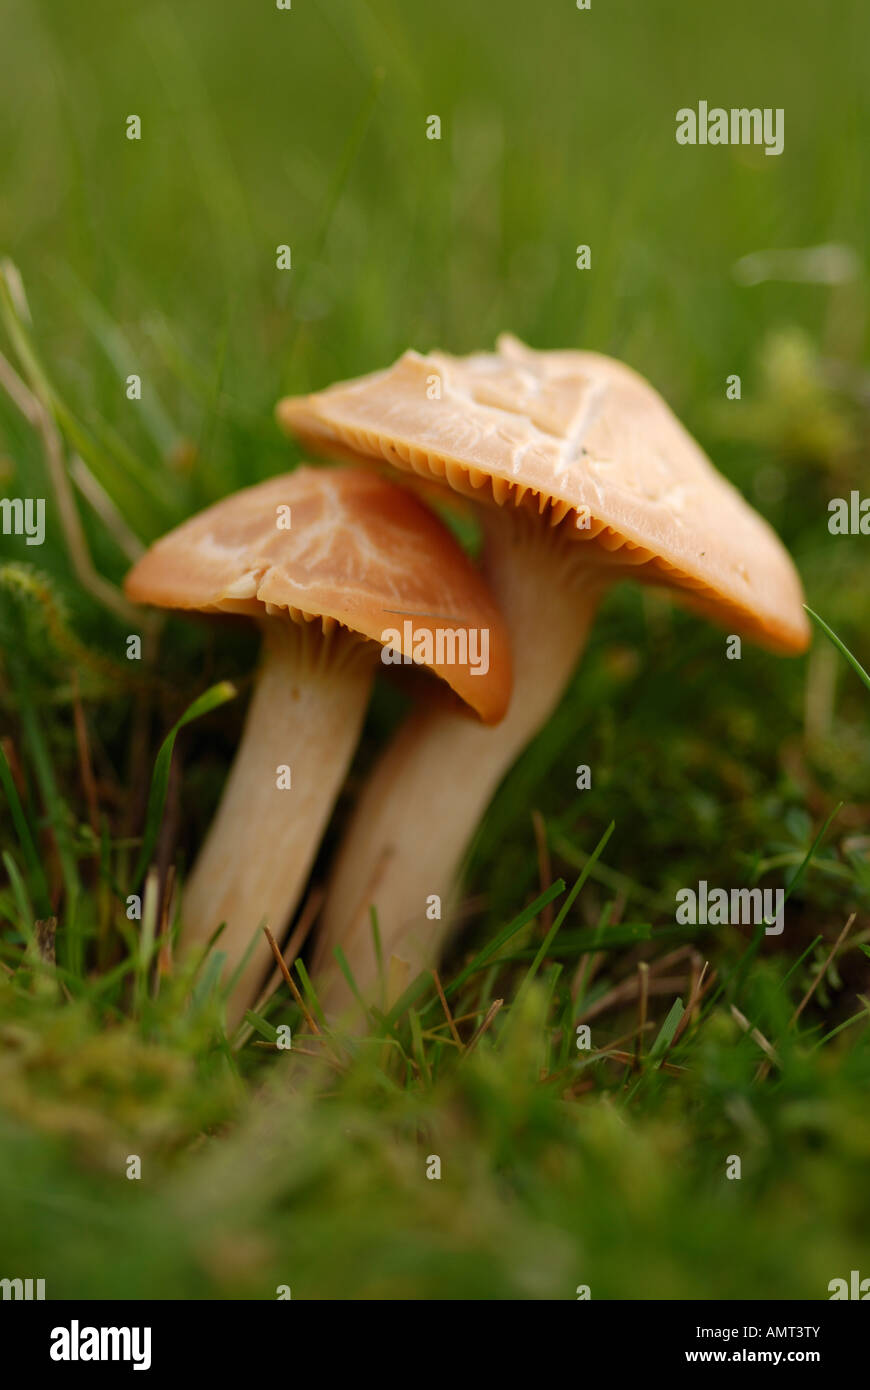 Two mushrooms close together Stock Photo